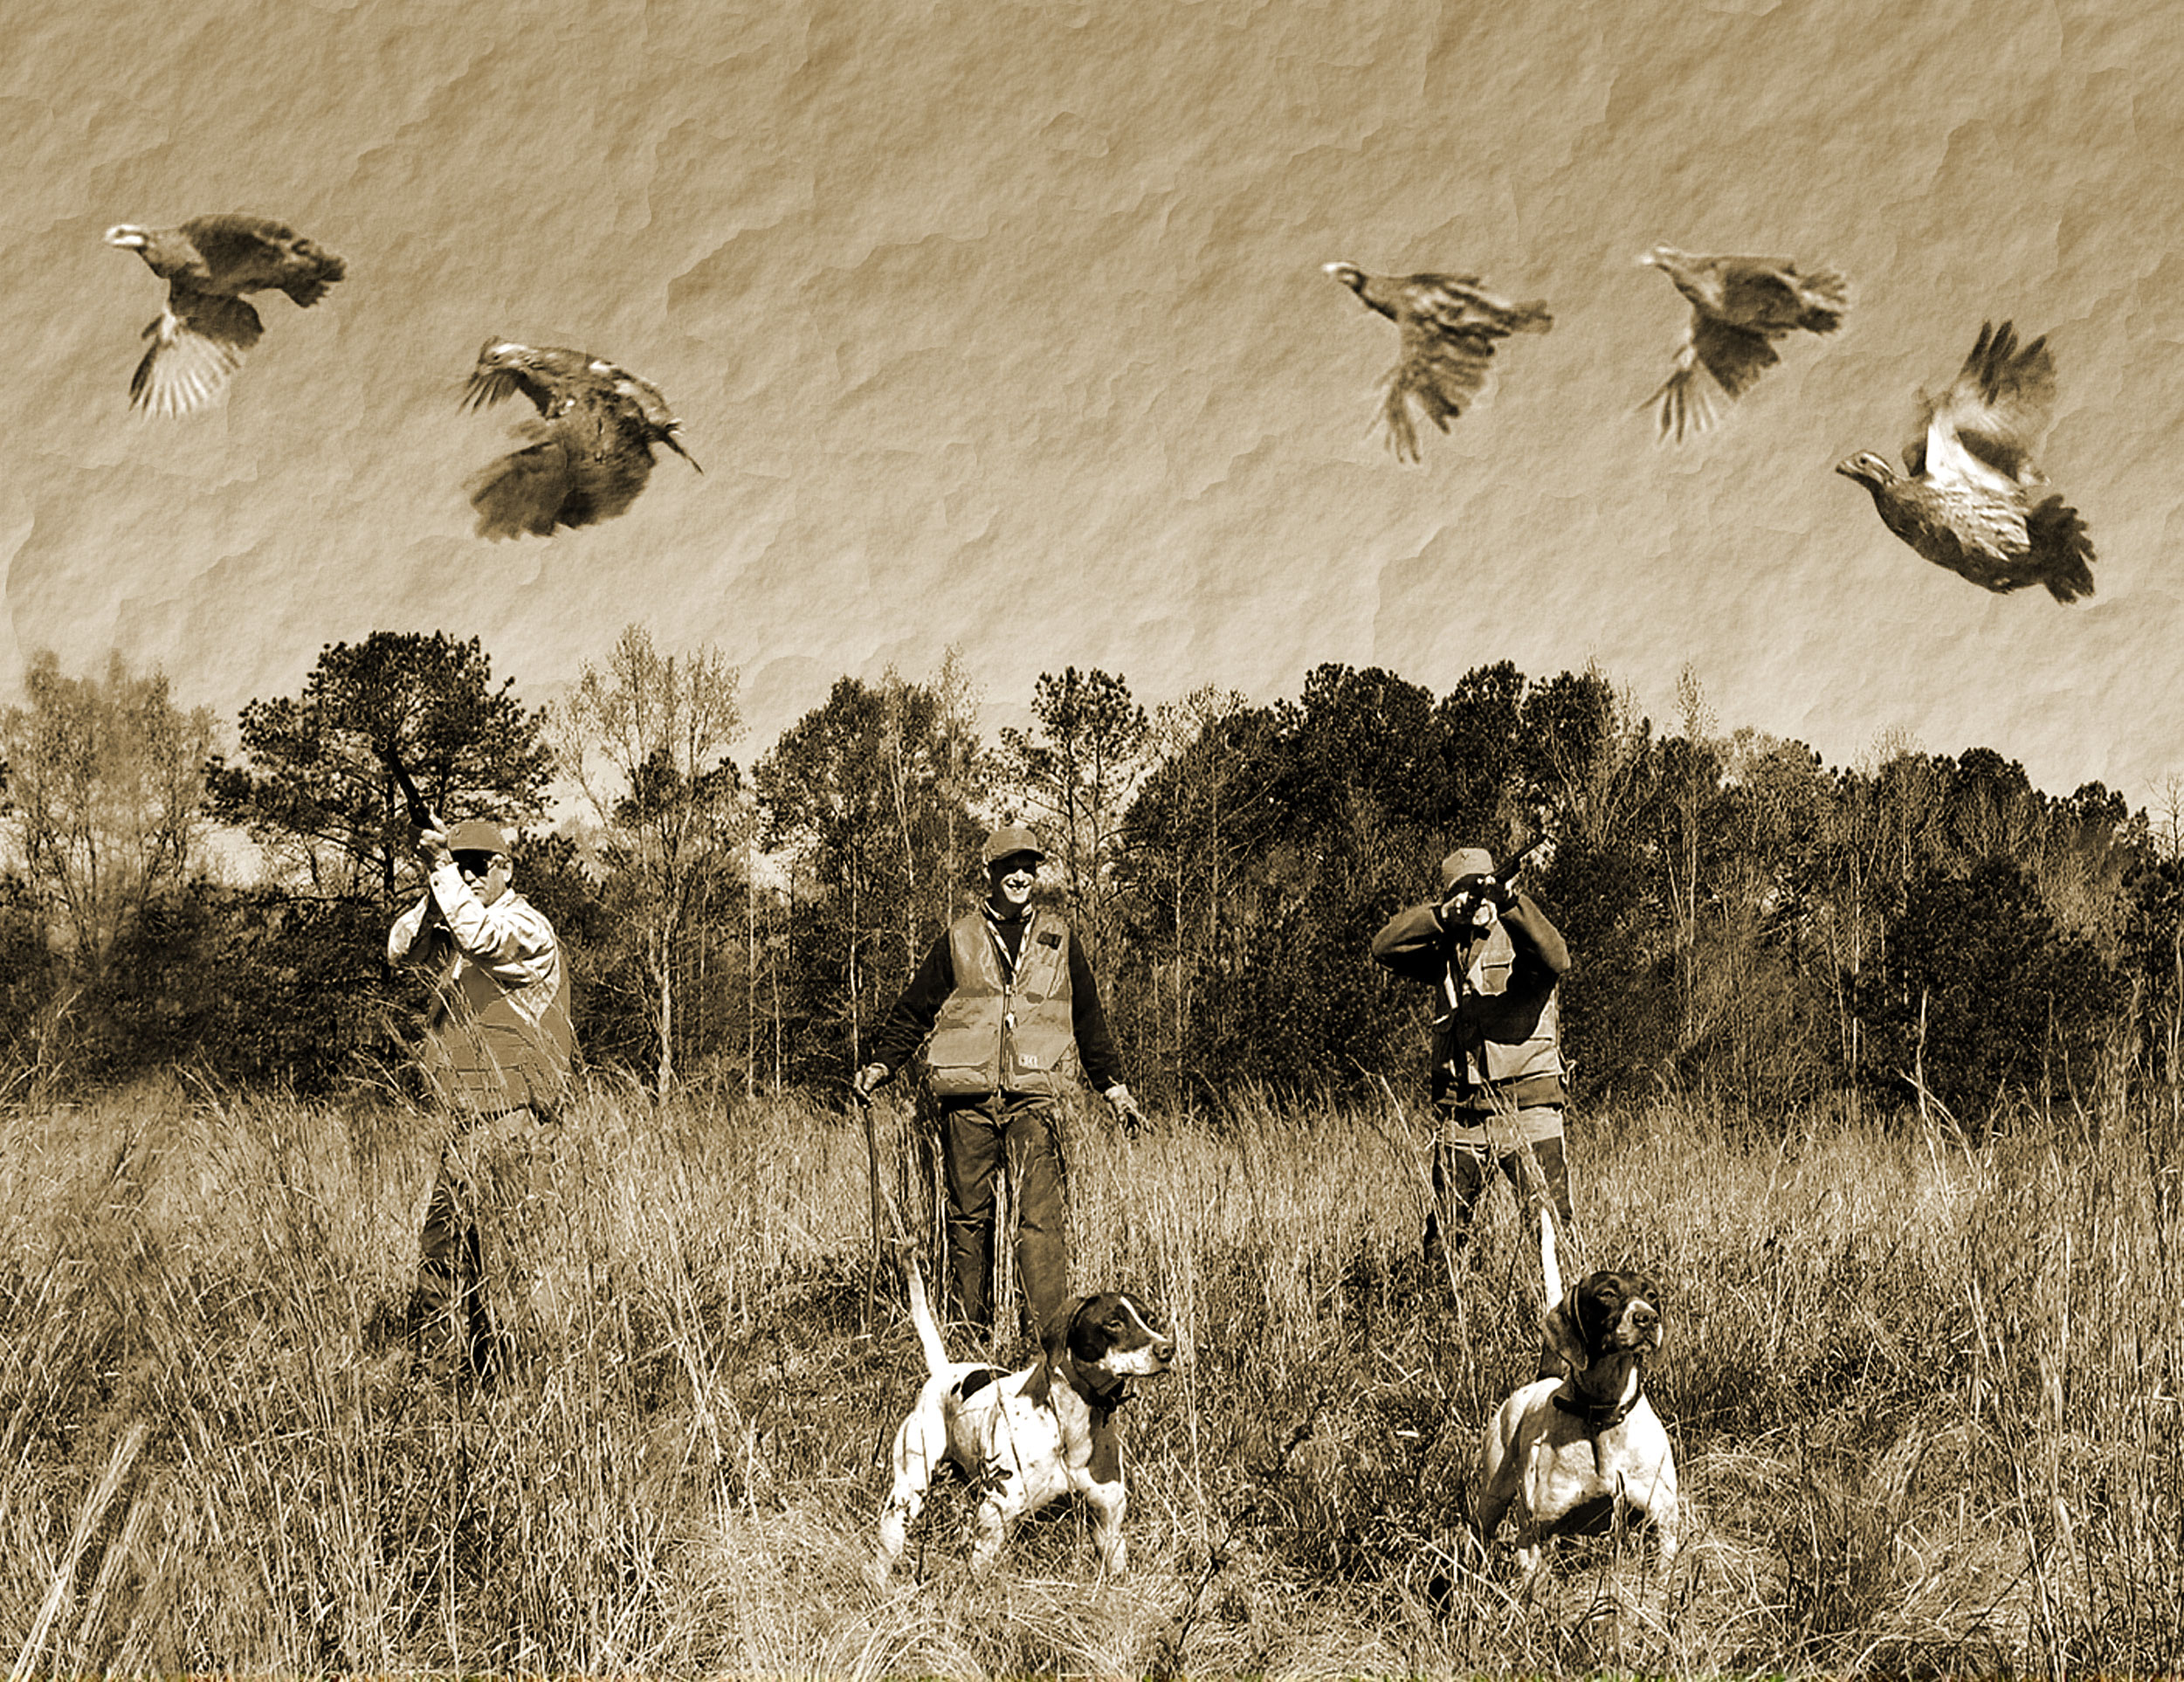 Brittany Bird Dog, Quail Rise Upland Hunting Scene Decal - Clip Art Library